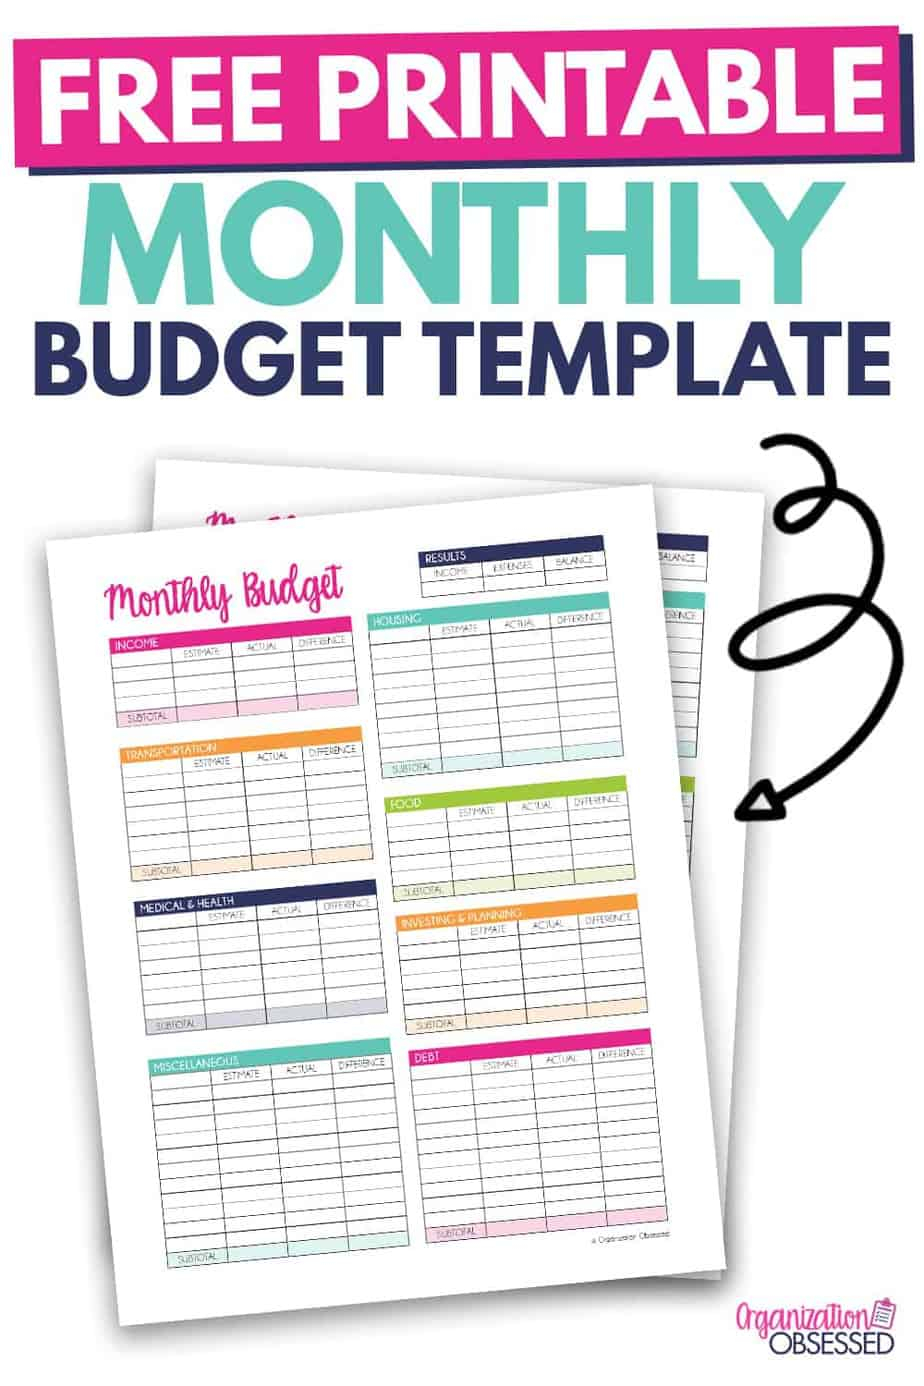 Monthly Budget Template Free Printable - Organization Obsessed Intended For Monthly Bill Budget Template In Monthly Bill Budget Template